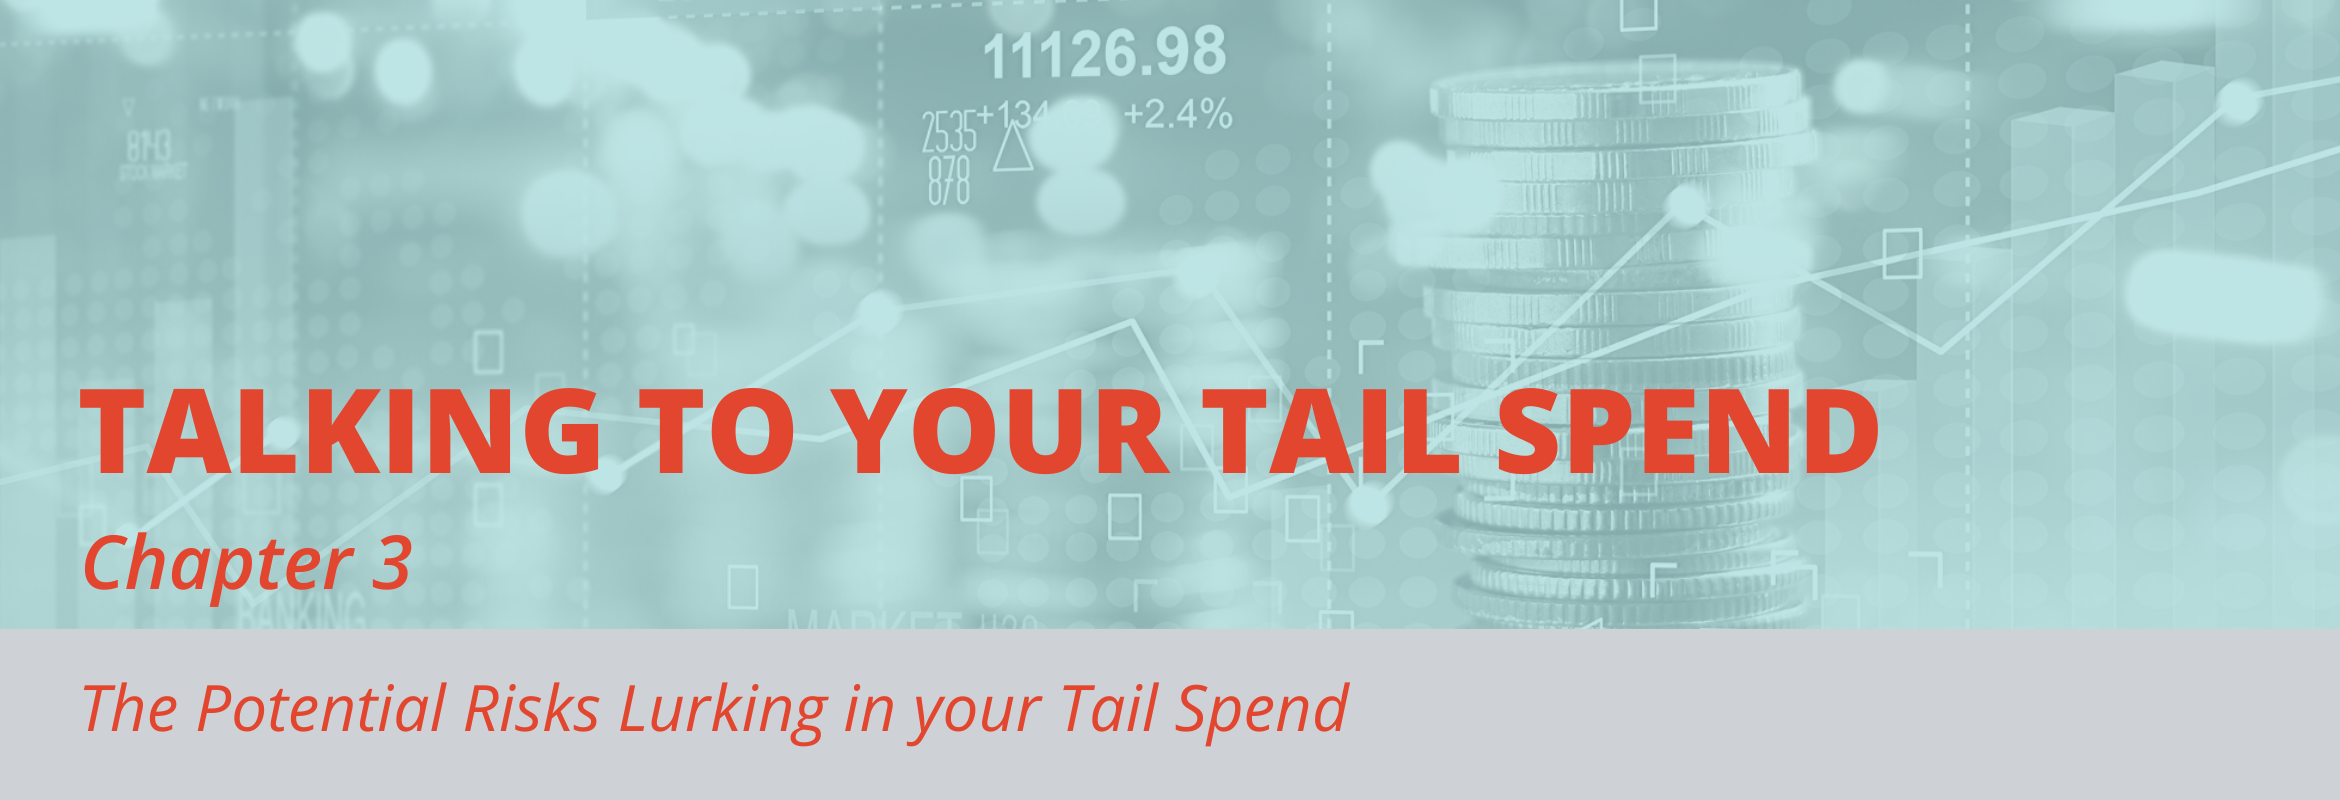 Unmanaged tail spend results in significant risks to organizations.